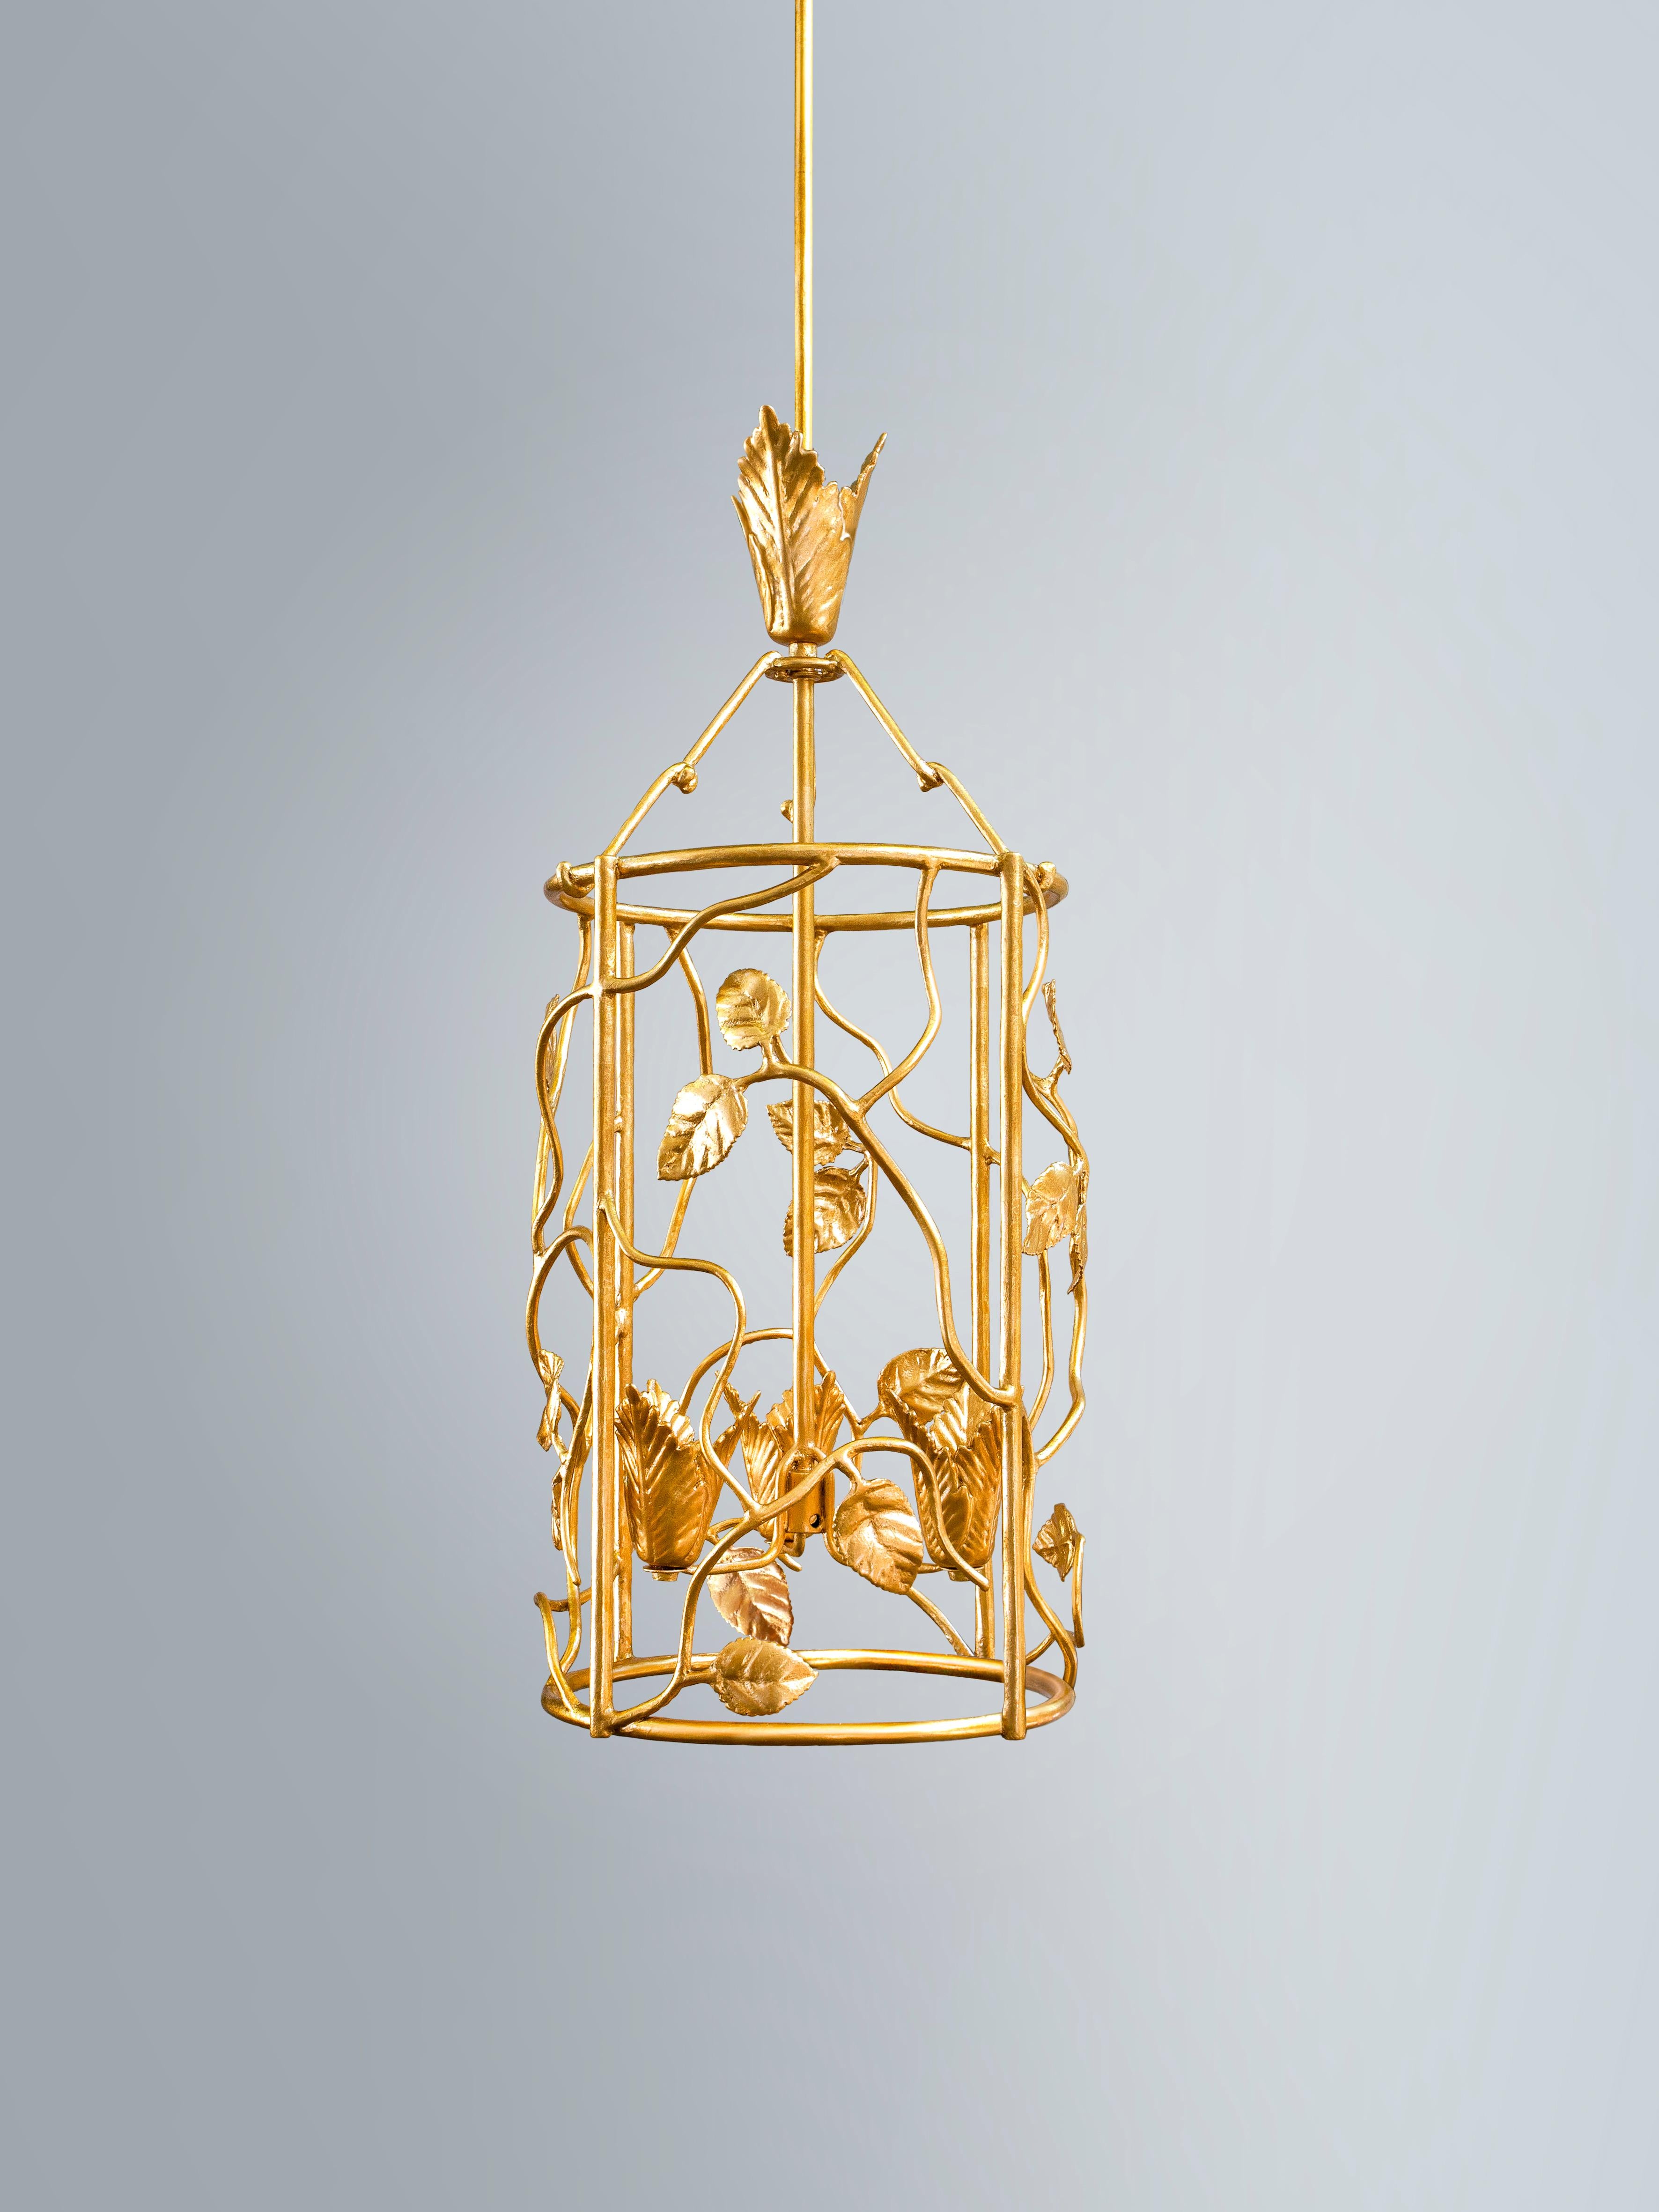 With rose leaves interspersed on a textured frame, this lantern resembles a piece of naturalistic sculpture. Uplighter with 3 bulbs. 
Please note these lantern are customisable- can be crafted in different sizes and finishes.There is a small and